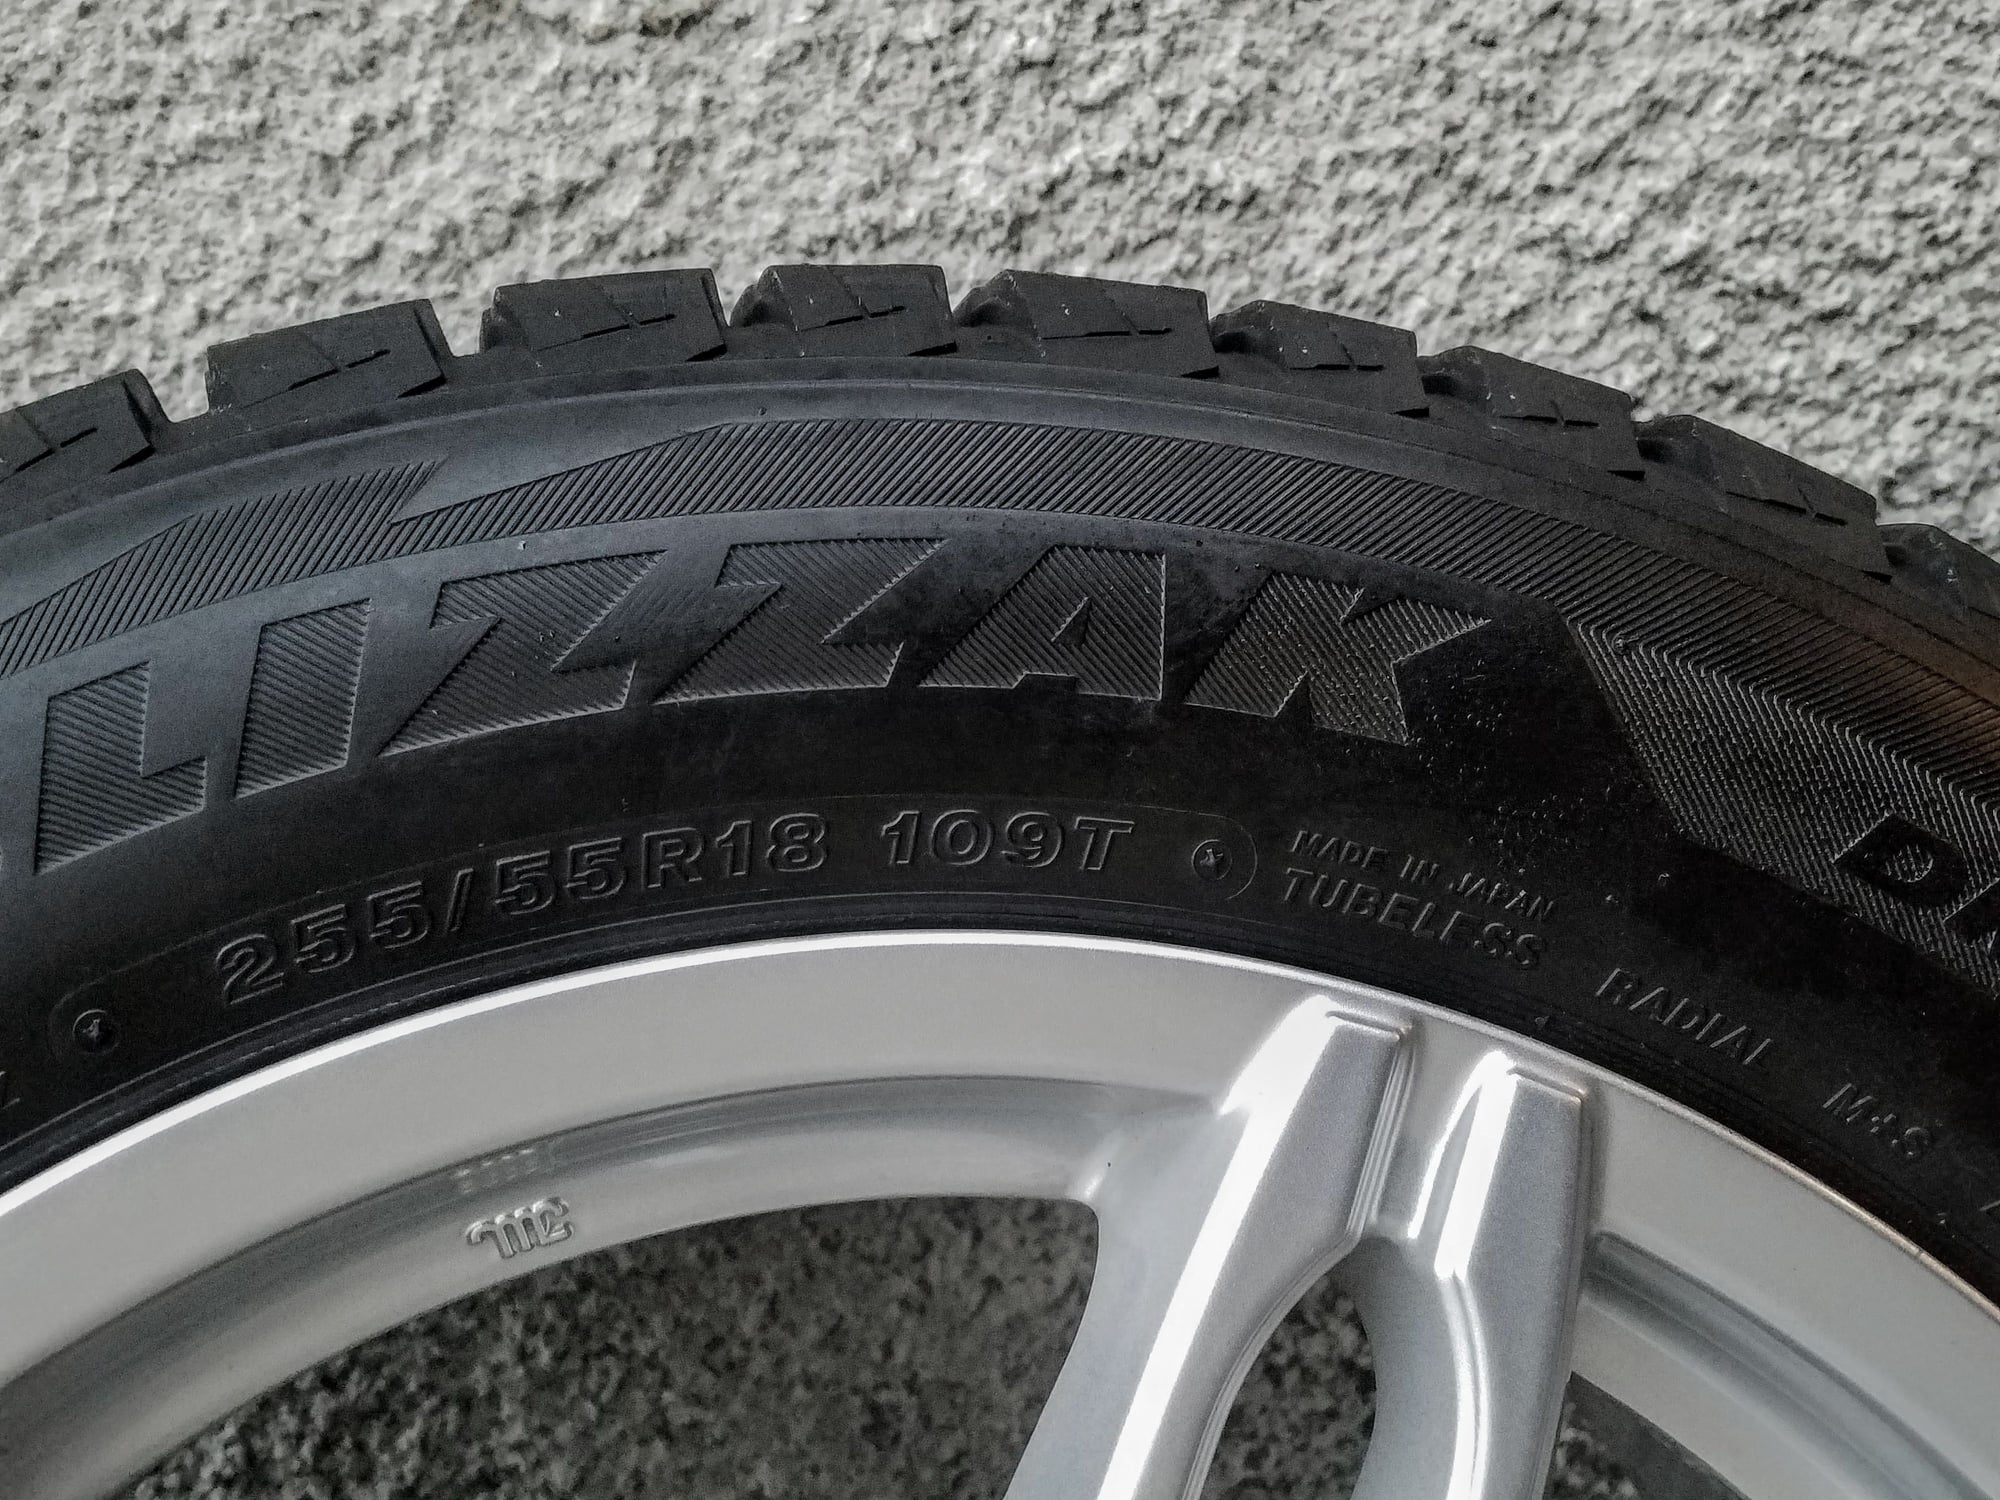 Wheels and Tires/Axles - Macan 2015-2019 Winter Wheels Tires , Alutec/Blizzak, TPMS, PERFECT 11/32nds - NJ/NYC - Used - 2015 to 2019 Porsche Macan - Weehawken, NJ 07086, United States